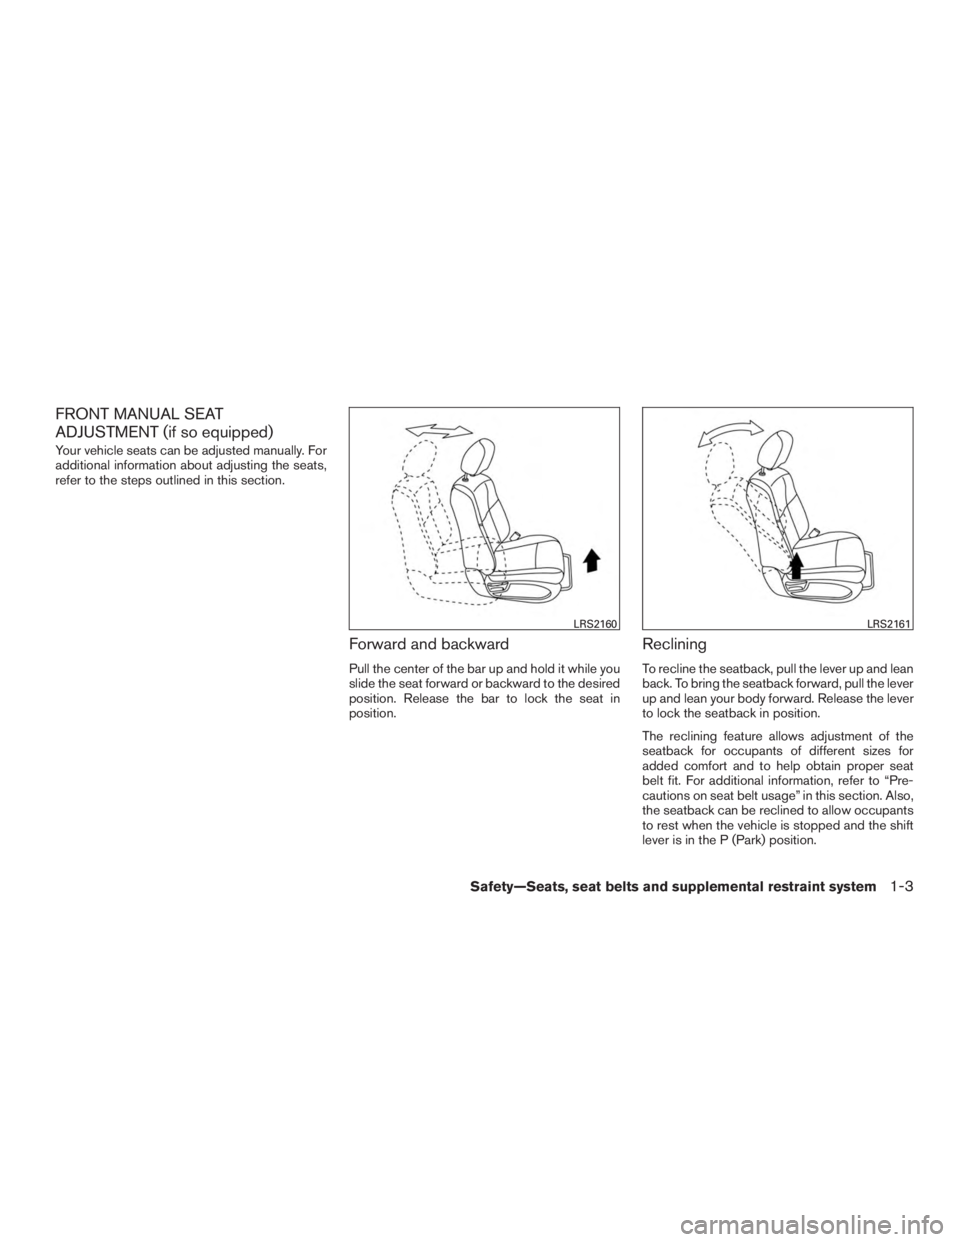 NISSAN ROGUE 2015  Owner´s Manual FRONT MANUAL SEAT
ADJUSTMENT (if so equipped)
Your vehicle seats can be adjusted manually. For
additional information about adjusting the seats,
refer to the steps outlined in this section.
Forward an